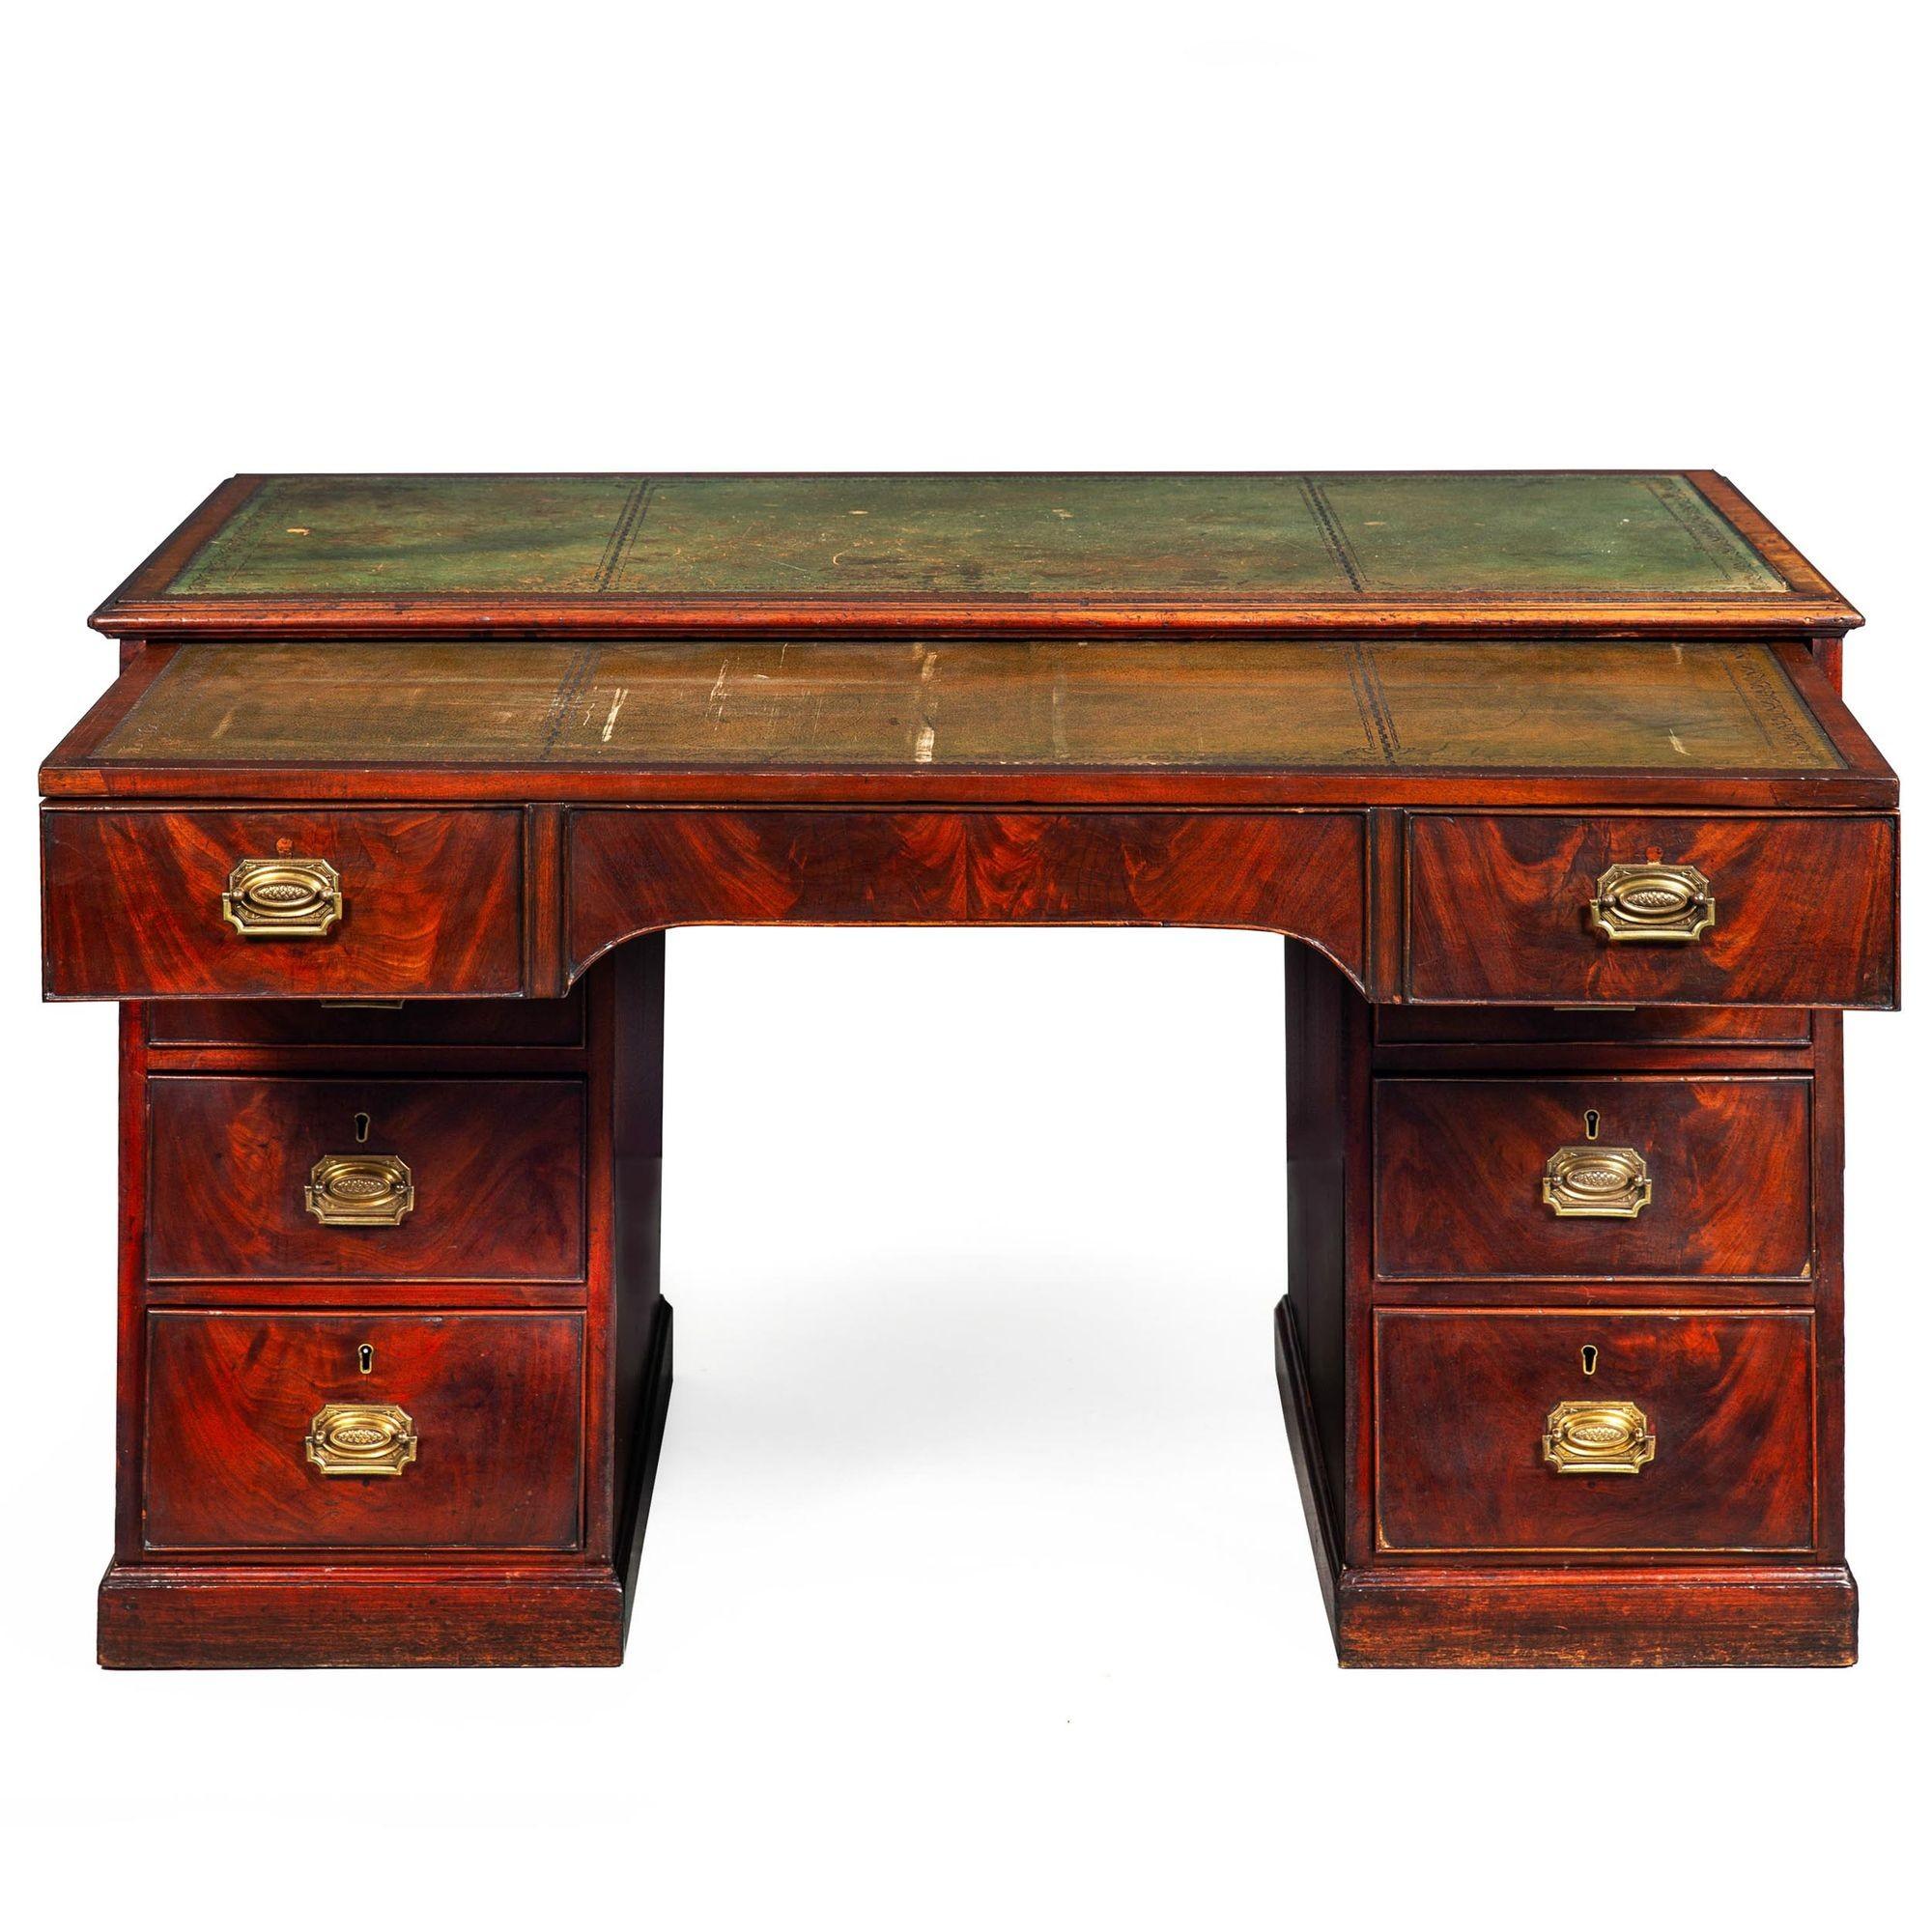 GEORGE III MAHOGANY & TOOLED LEATHER PEDESTAL DESK WITH 